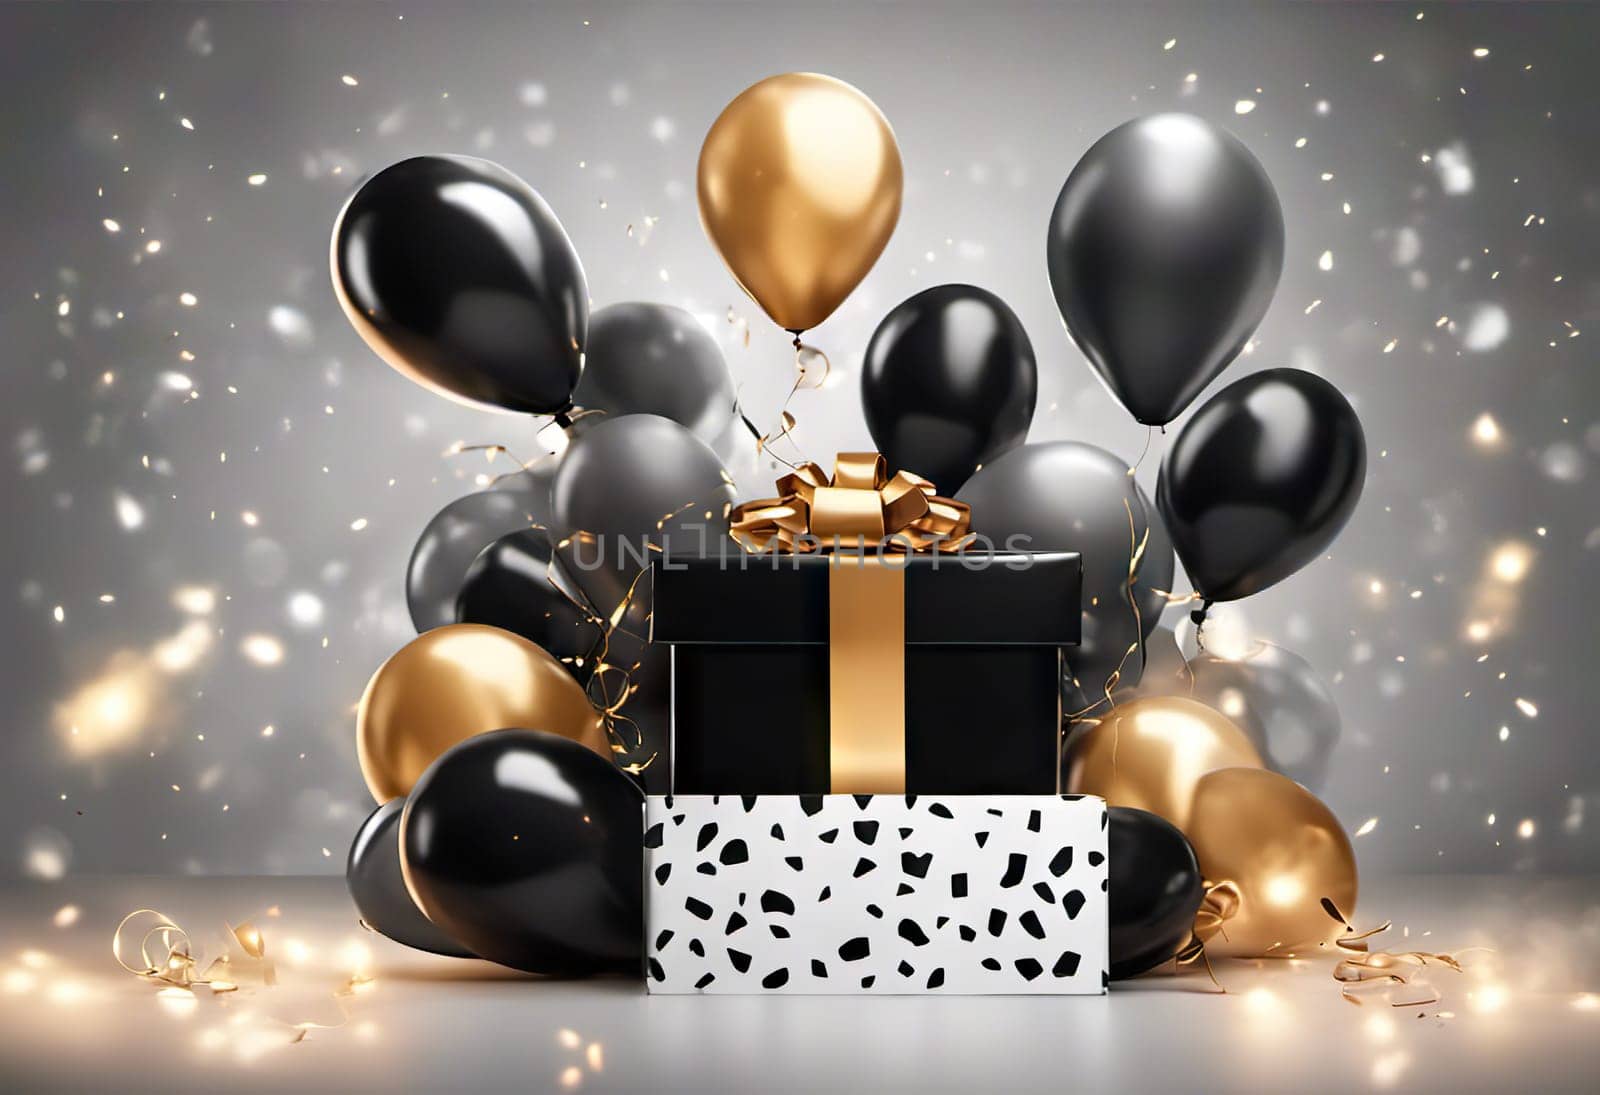 Gift box with colorful balloons and confetti on background, copy space, holiday concept for birthday or black friday discounts by EkaterinaPereslavtseva